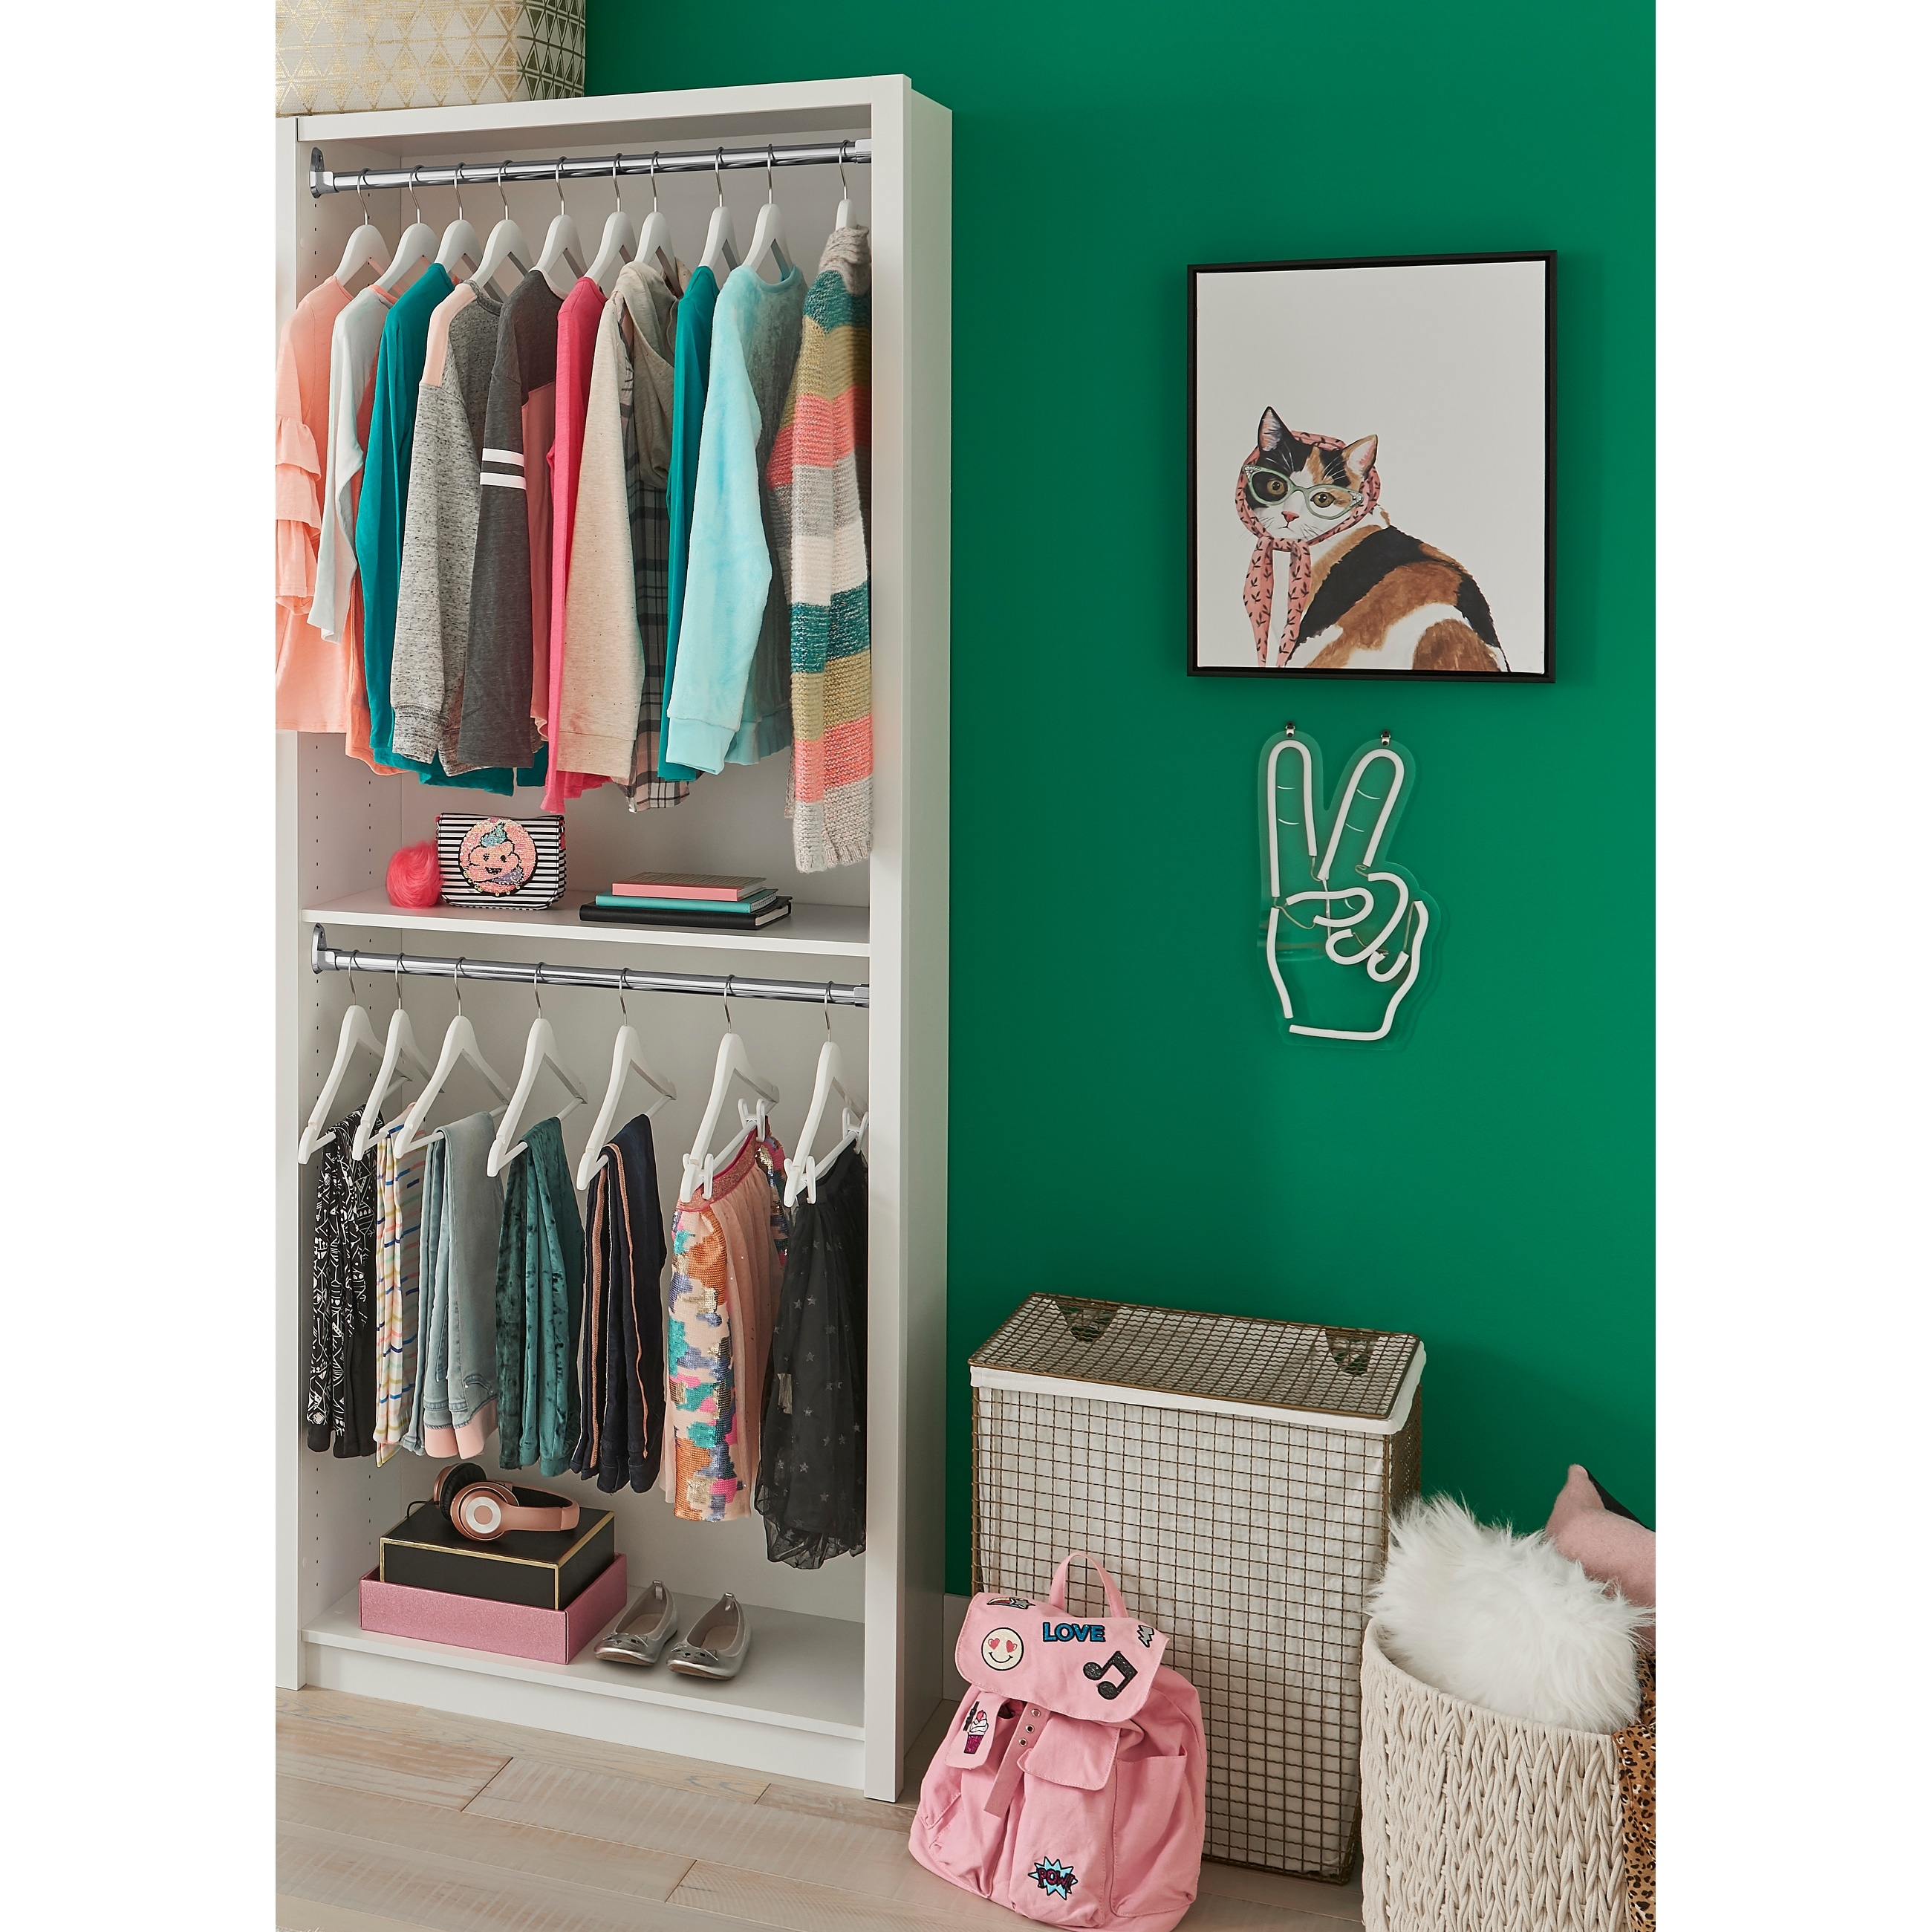 https://ak1.ostkcdn.com/images/products/is/images/direct/f81561b9636e9cbc615fe54d0812ecd8cdc19f84/ClosetMaid-SpaceCreations-90-in.-Closet-System.jpg